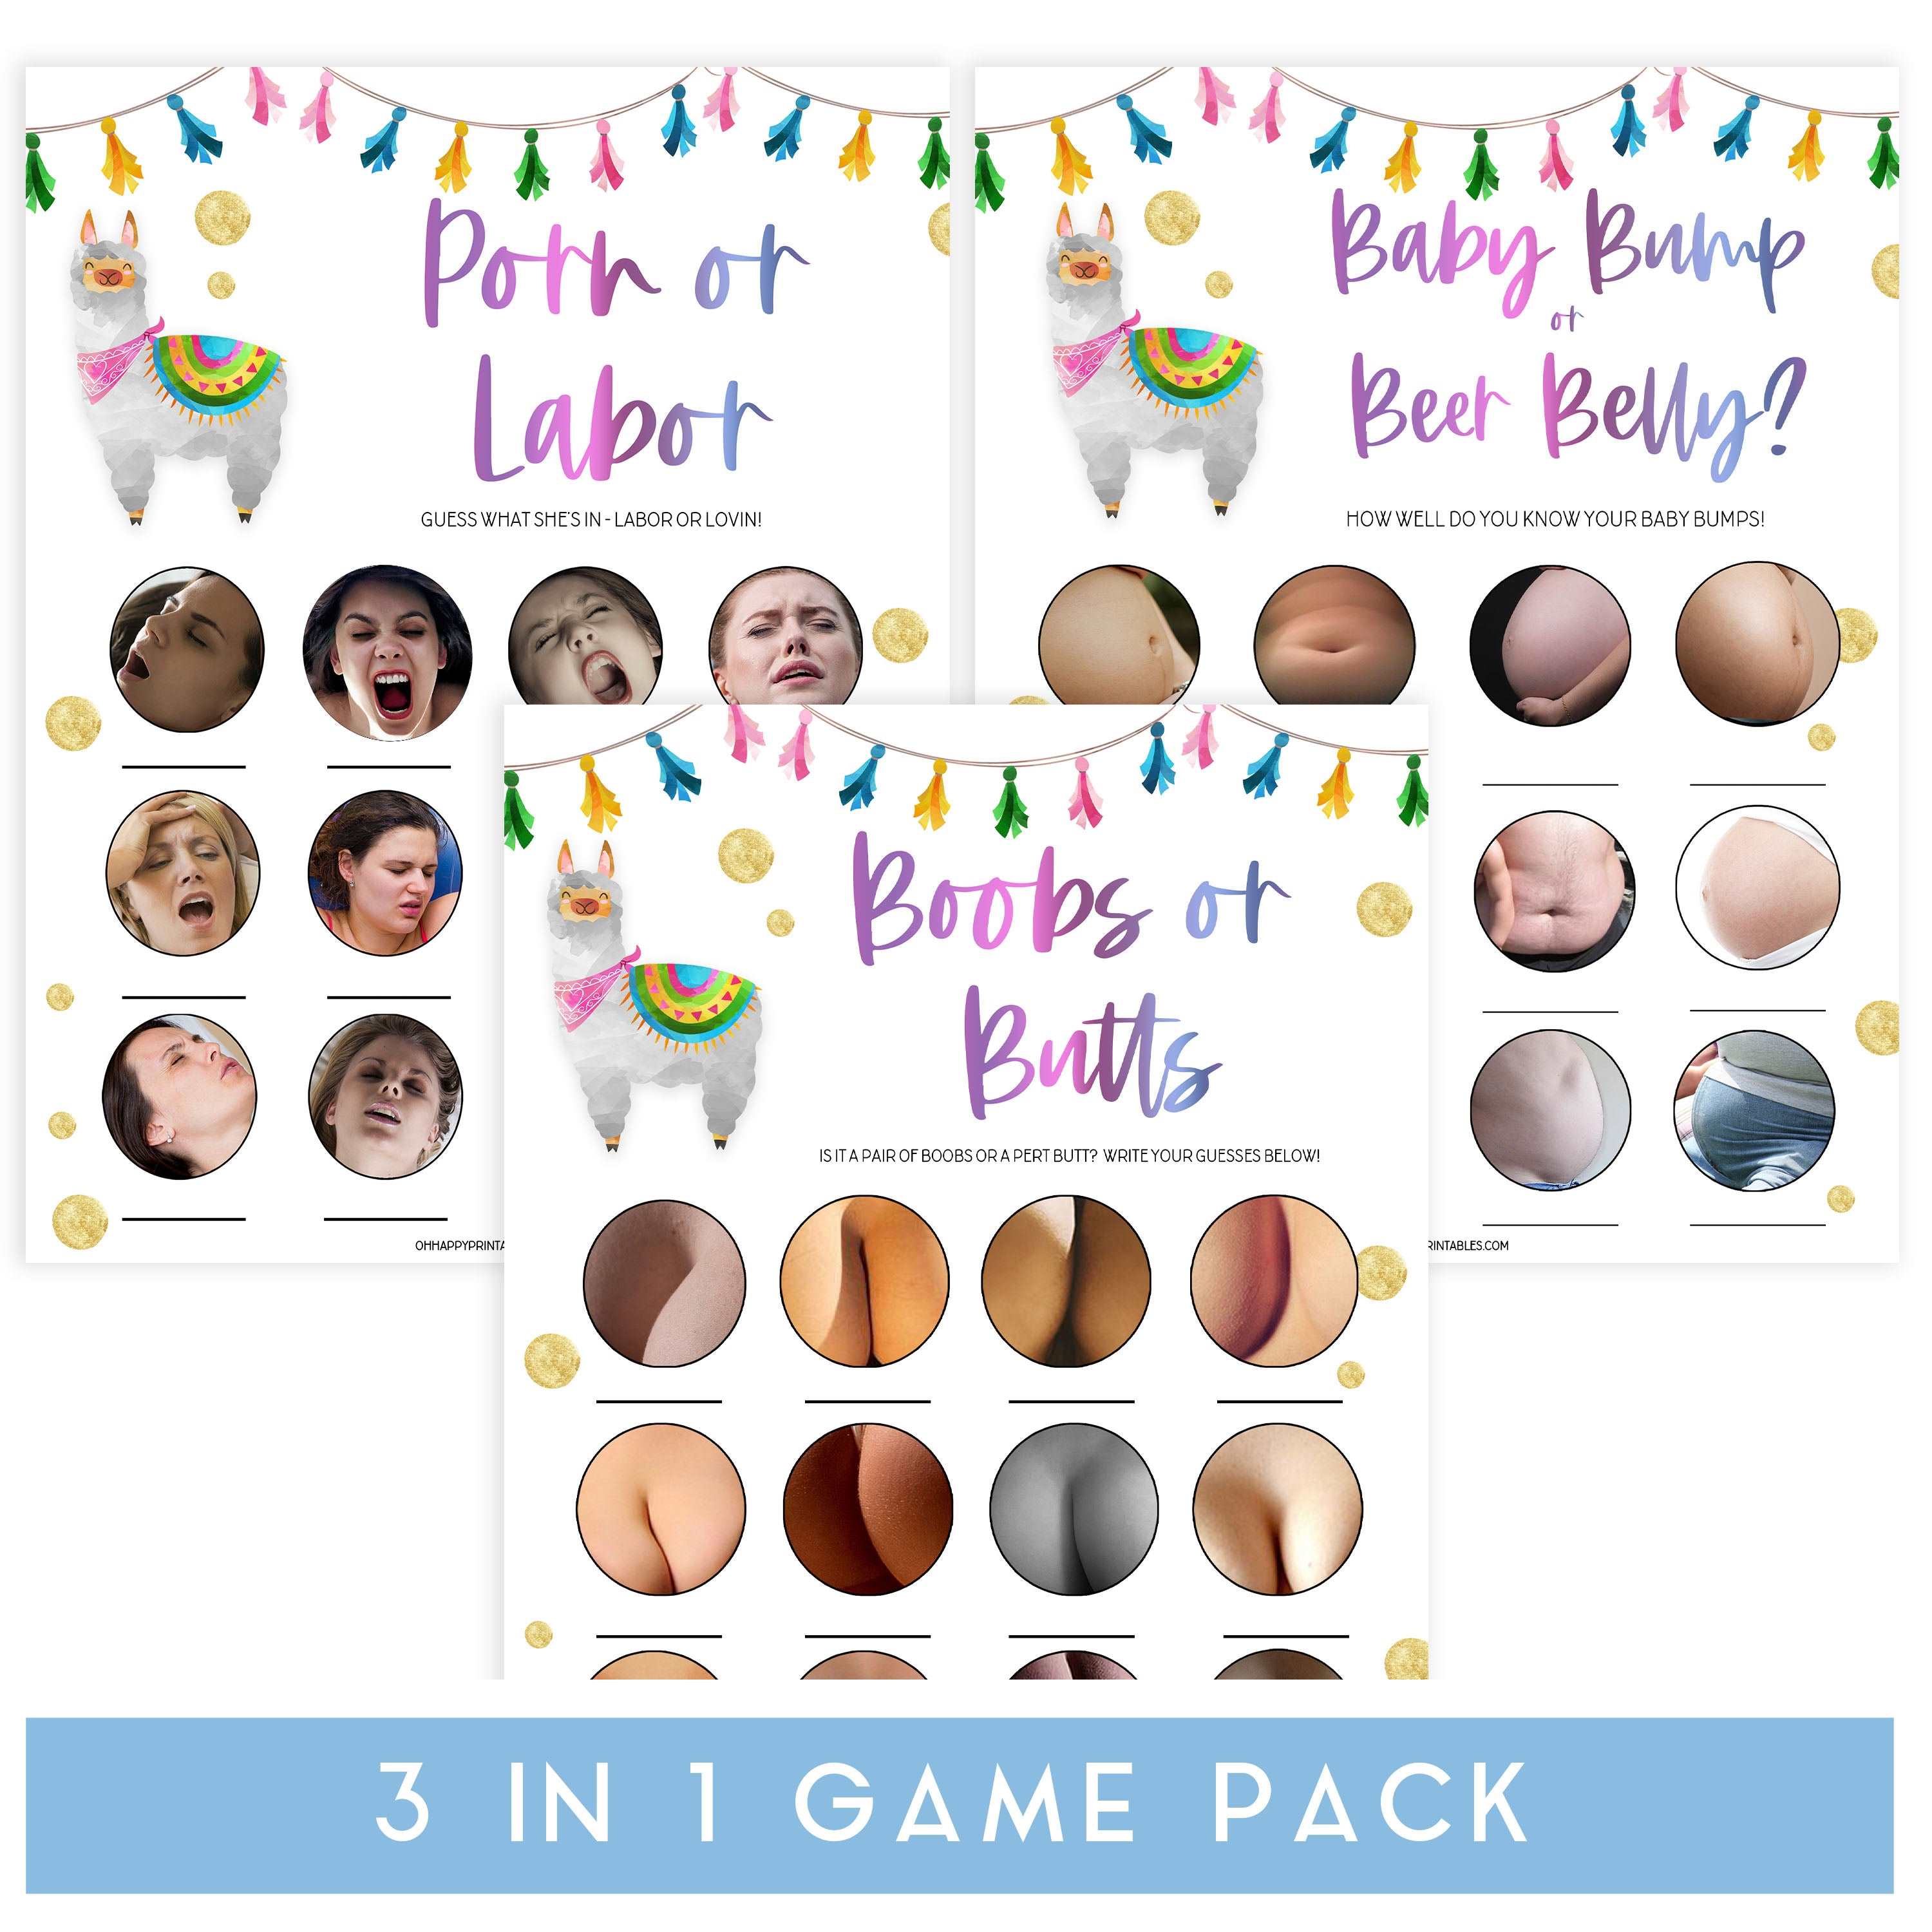 porn or labor, baby bump or beer belly, boobs or butts, Printable baby shower games, llama fiesta fun baby games, baby shower games, fun baby shower ideas, top baby shower ideas, Llama fiesta shower baby shower, fiesta baby shower ideas